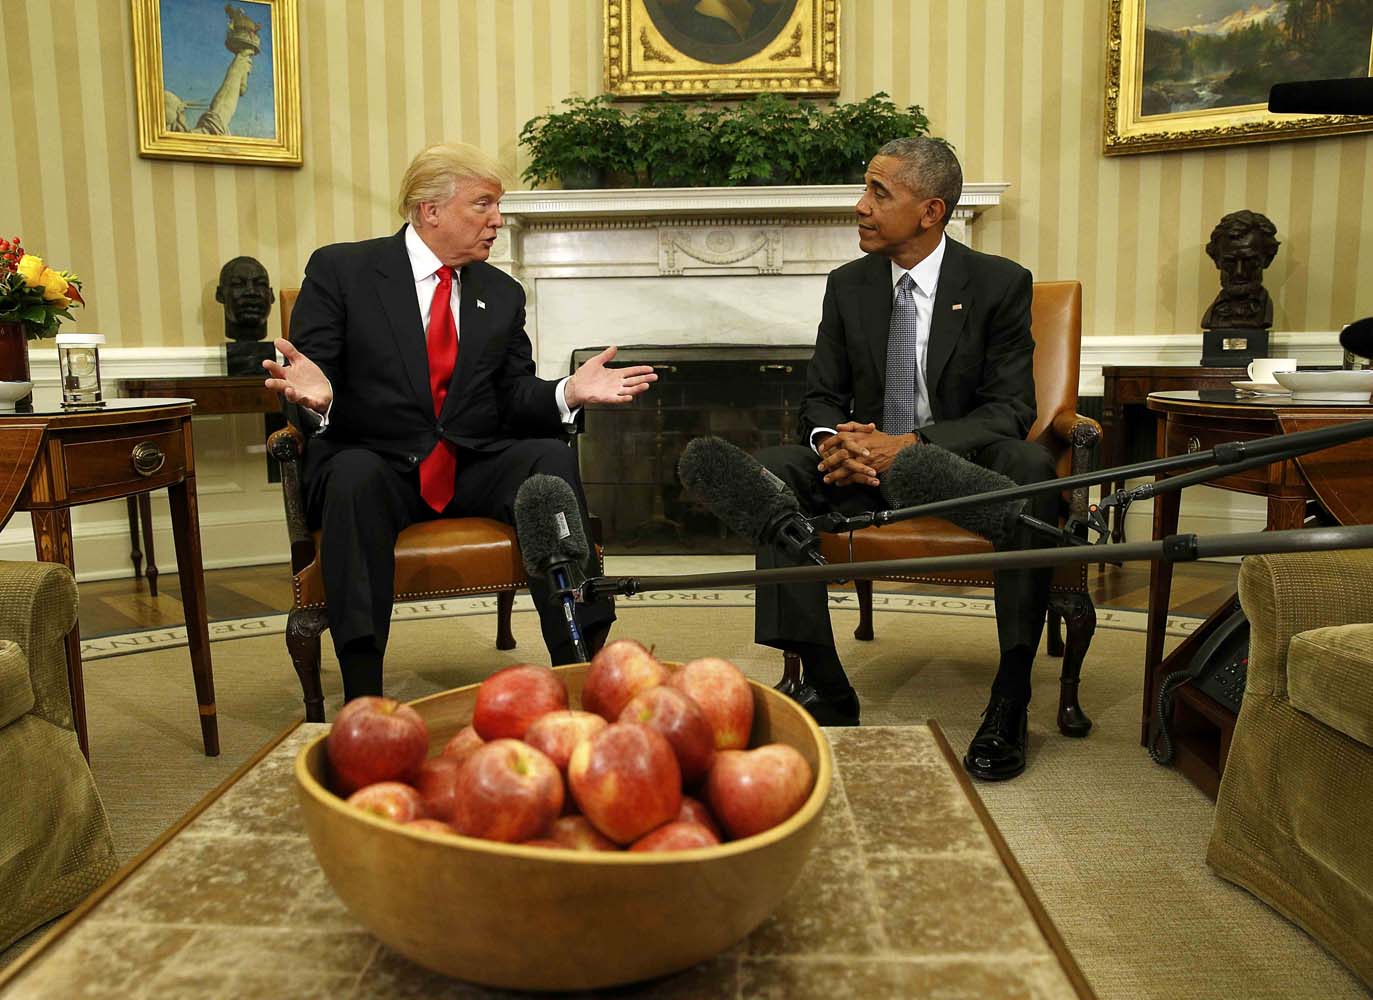 U.S. President Barack Obama meets with President-elect Donald Trump (L) to discuss transition plans in the White House Oval Office in Washington, U.S., November 10, 2016. REUTERS/Kevin Lamarque TPX IMAGES OF THE DAY